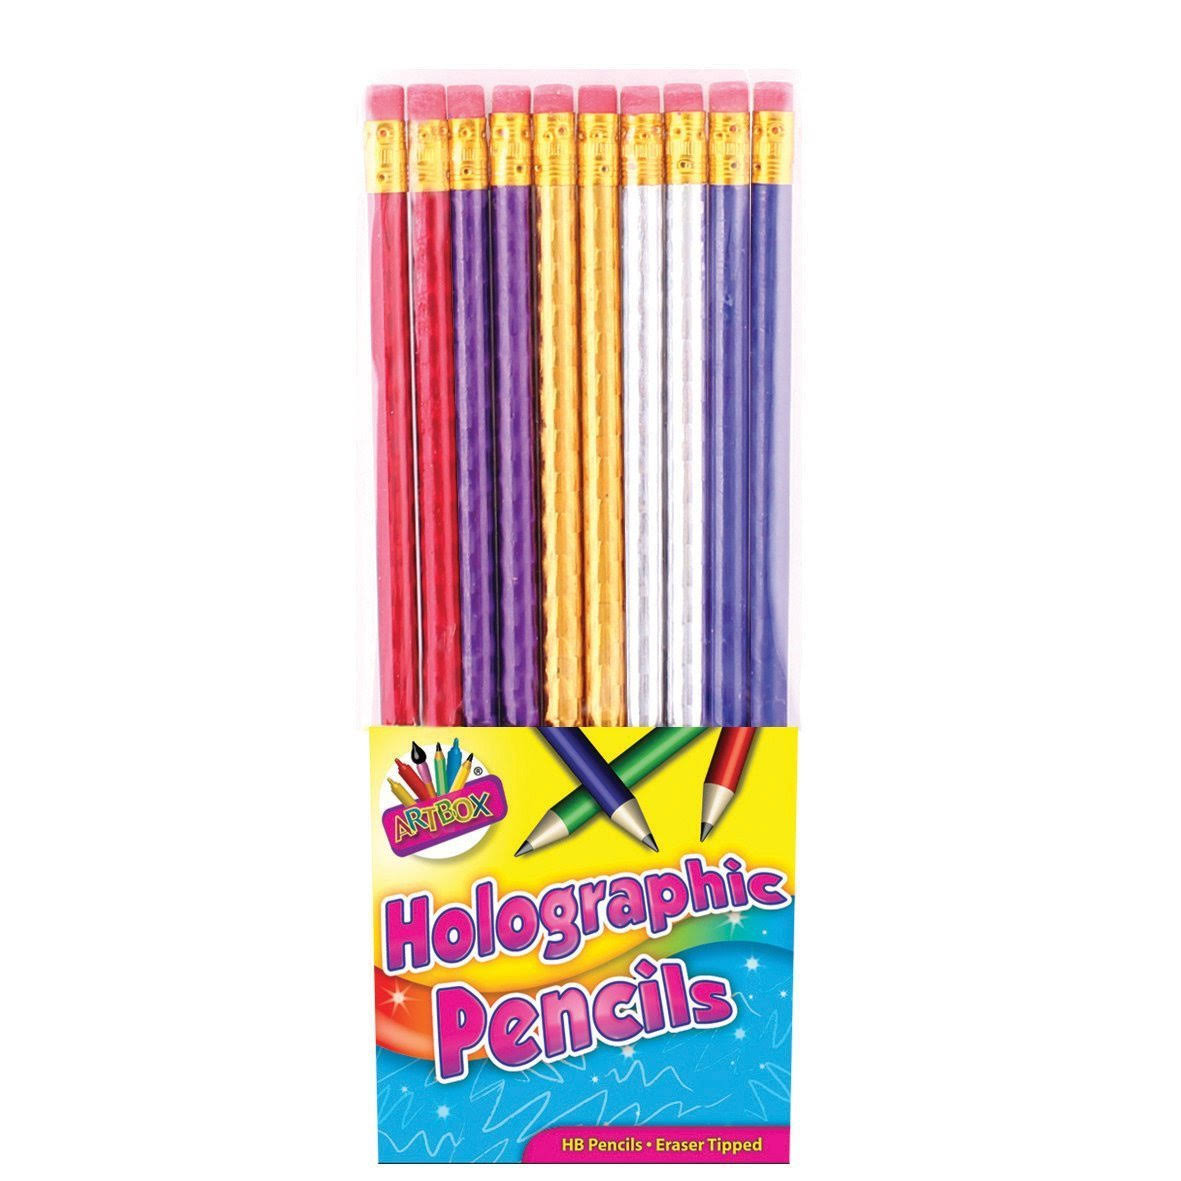 Artbox Holographic HB Pencil (Pack of 10)